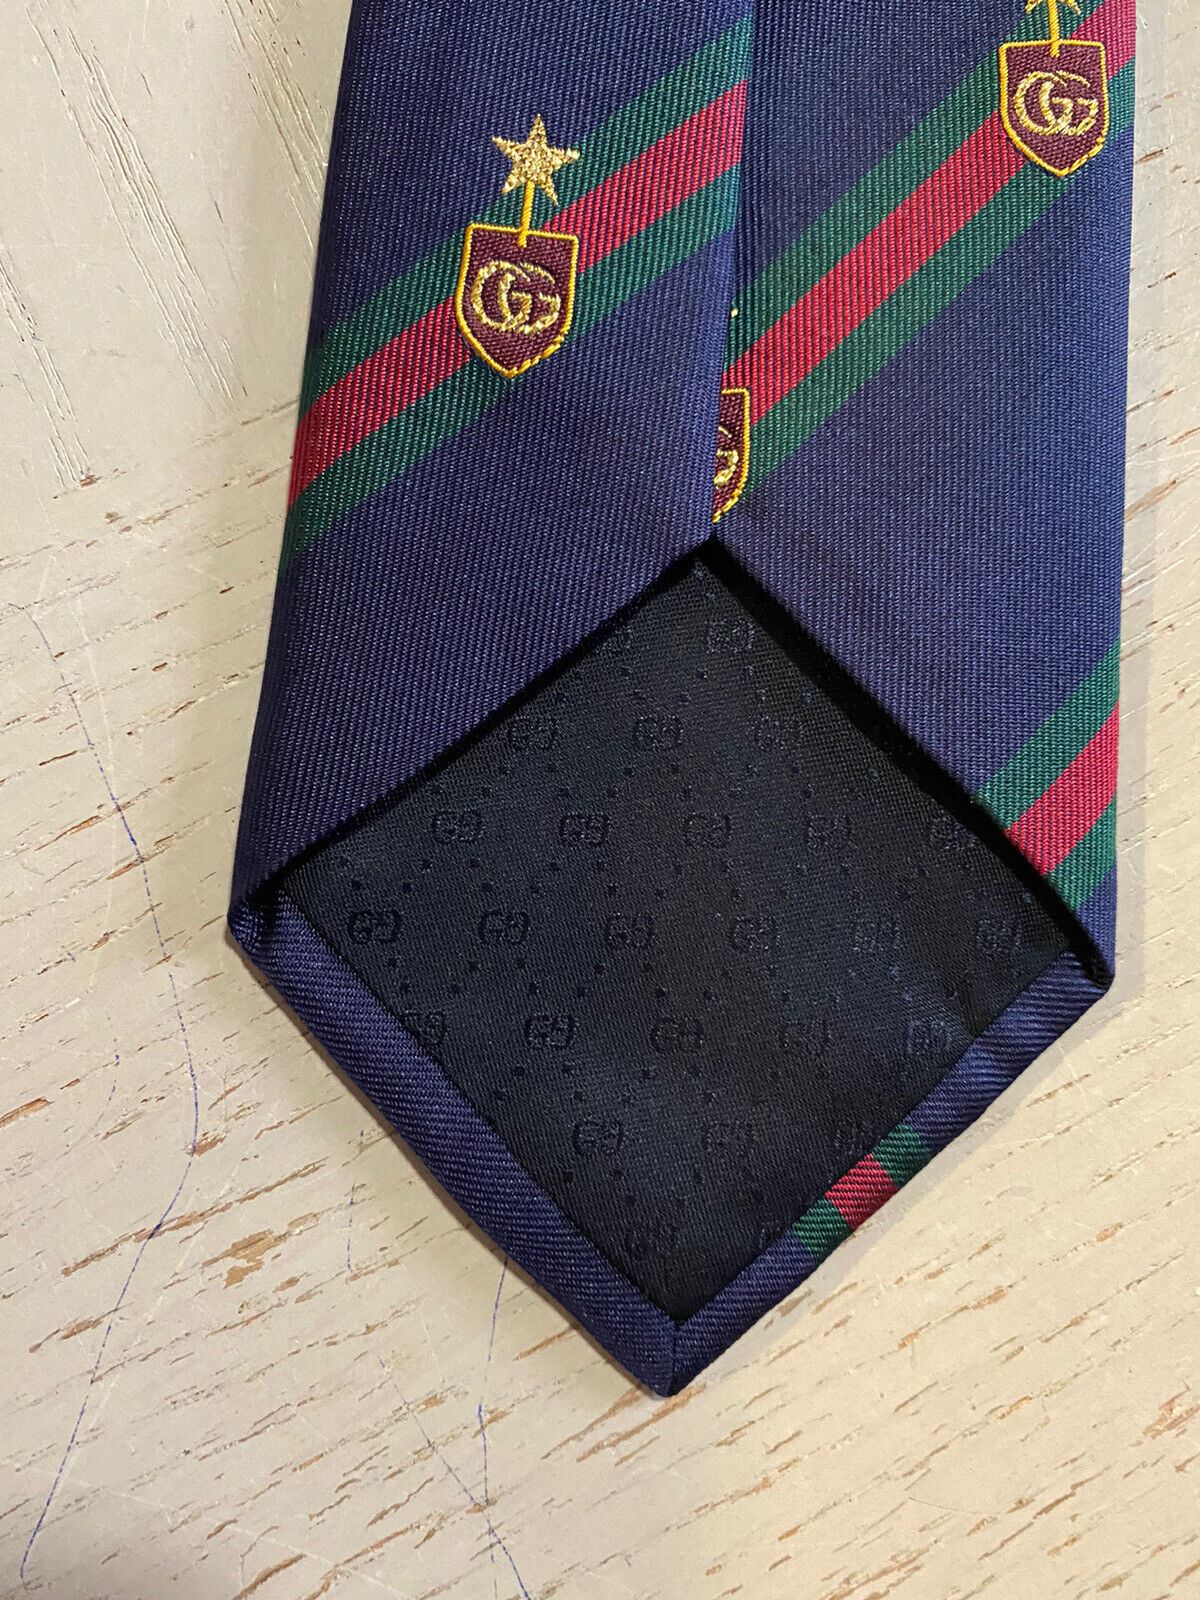 New Gucci Mens GG Monogram Silk Neck Tie Navy made in Italy